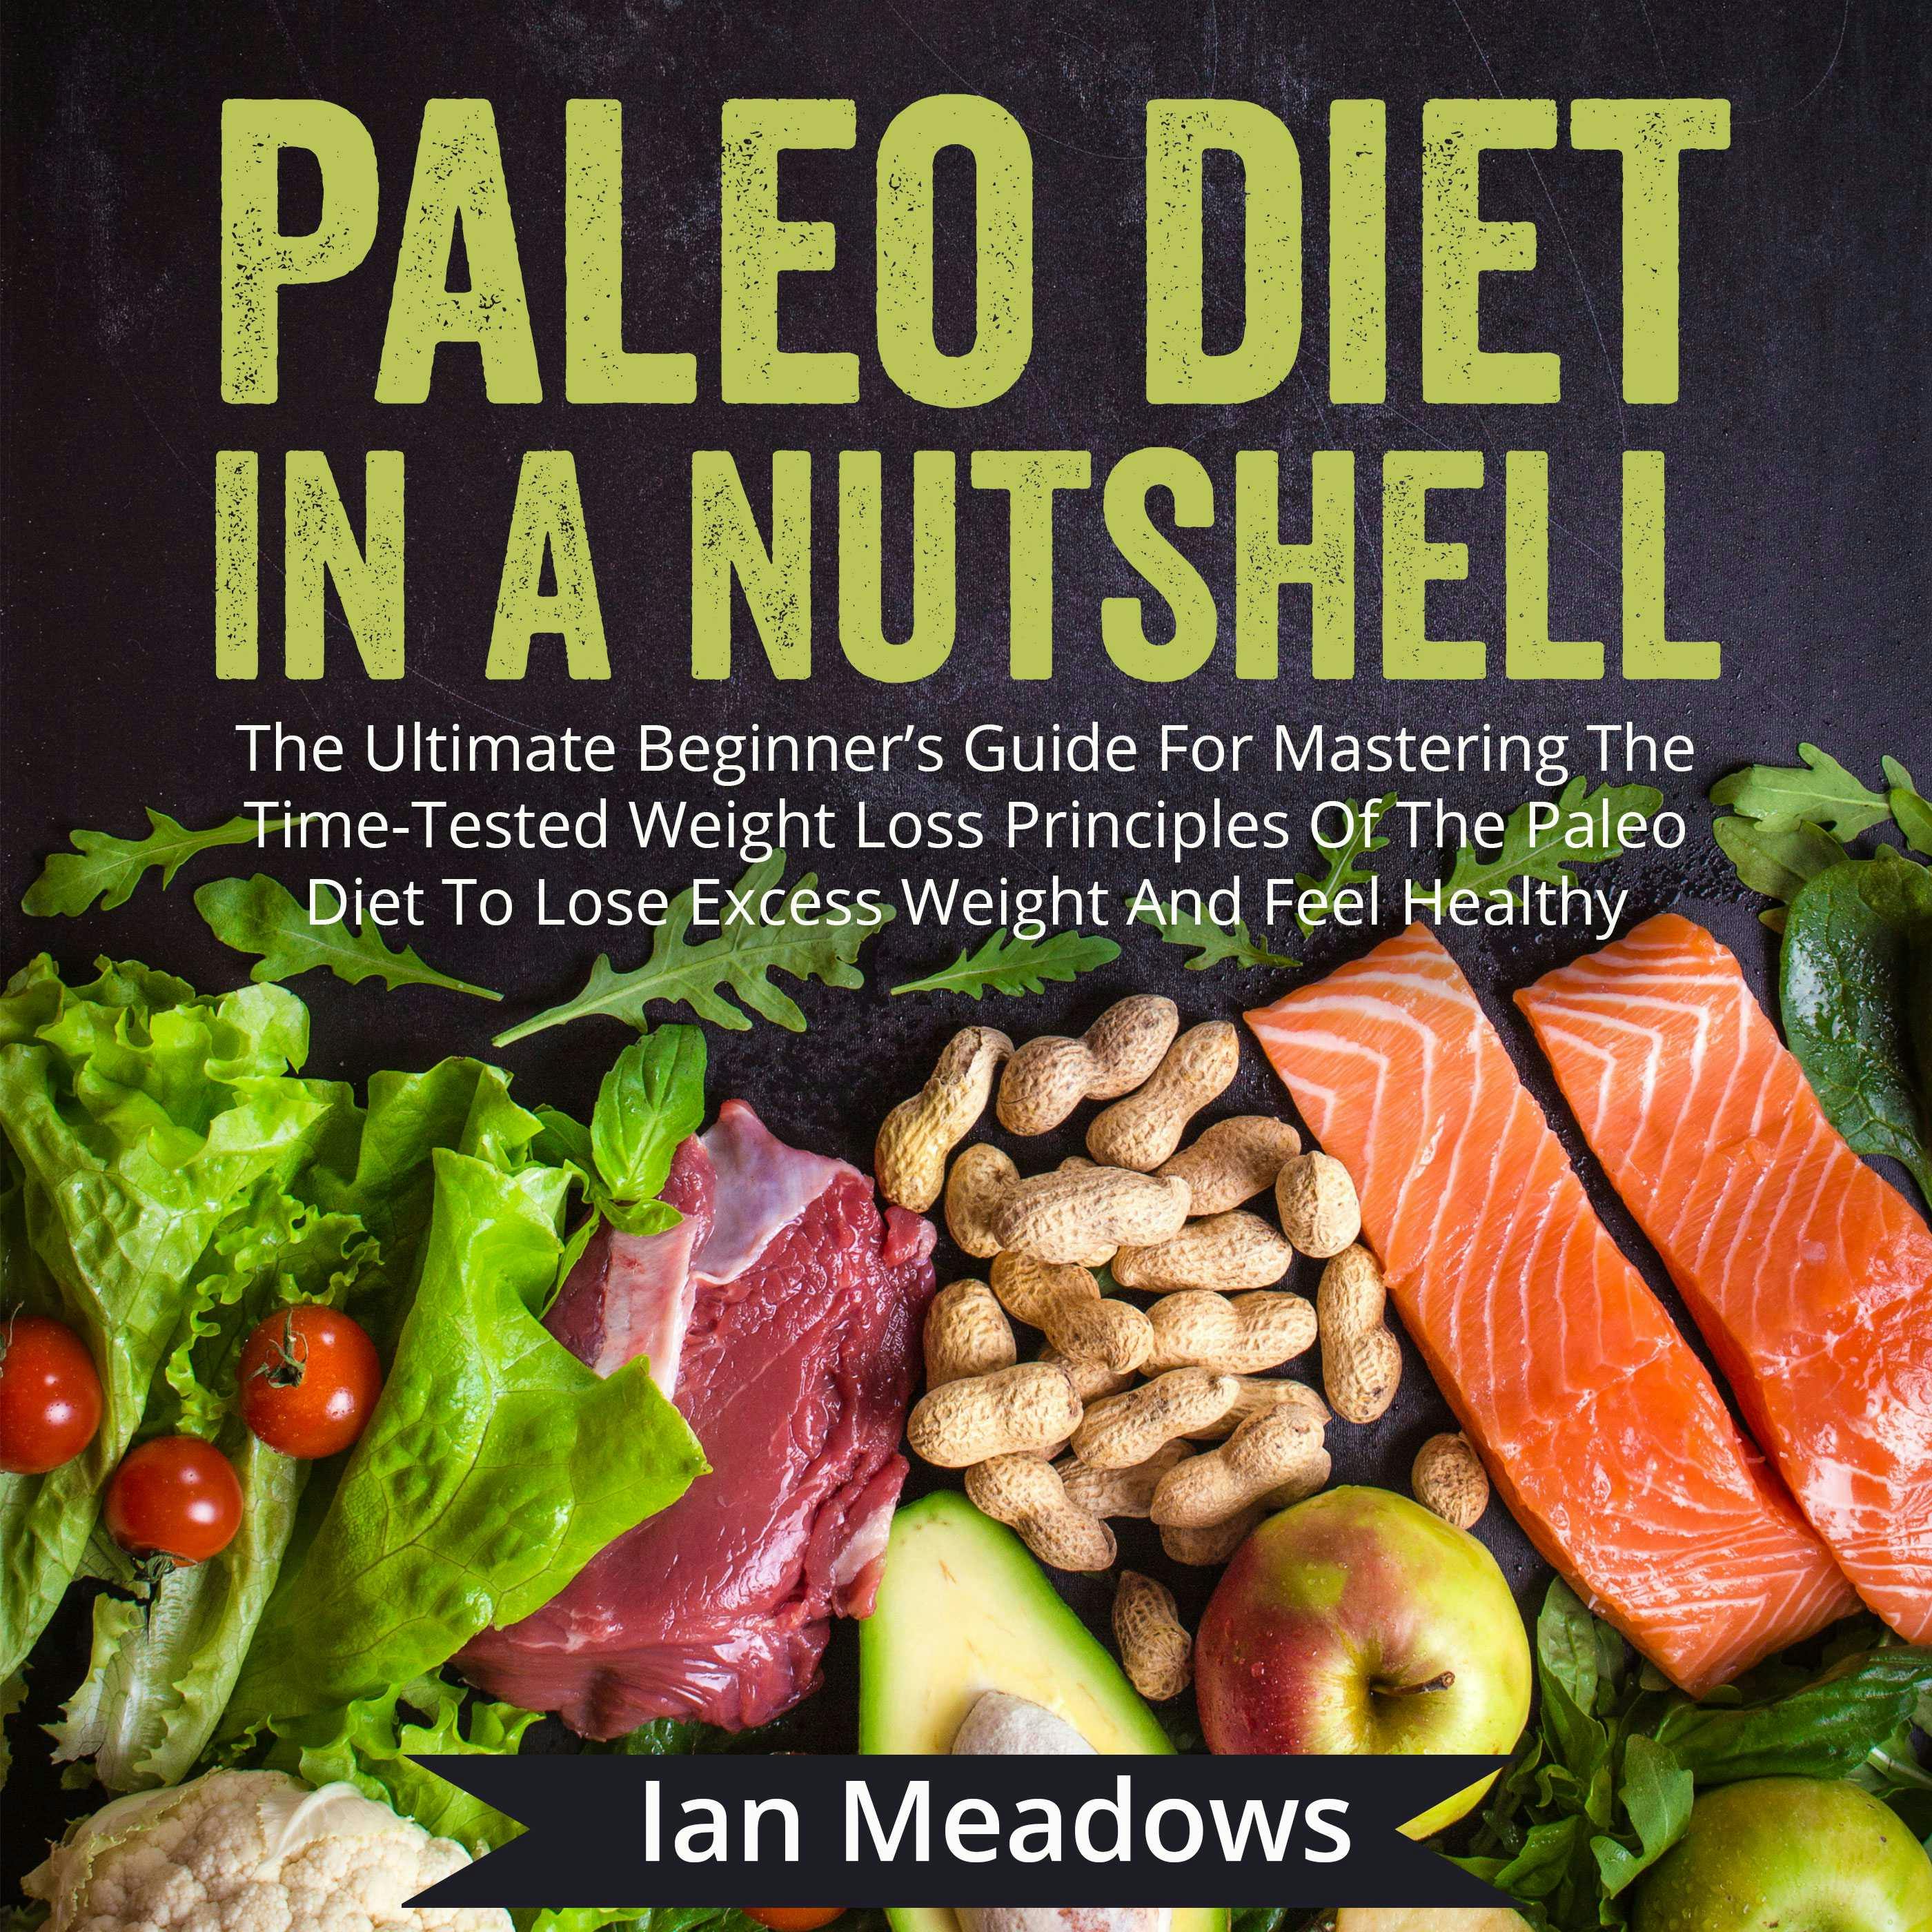 Paleo Diet In A Nutshell: The Ultimate Beginner's Guide For Mastering The Time-Tested Weight Loss Principles Of The Paleo Diet To Lose Excess Weight And Feel Healthy - Ian Meadows